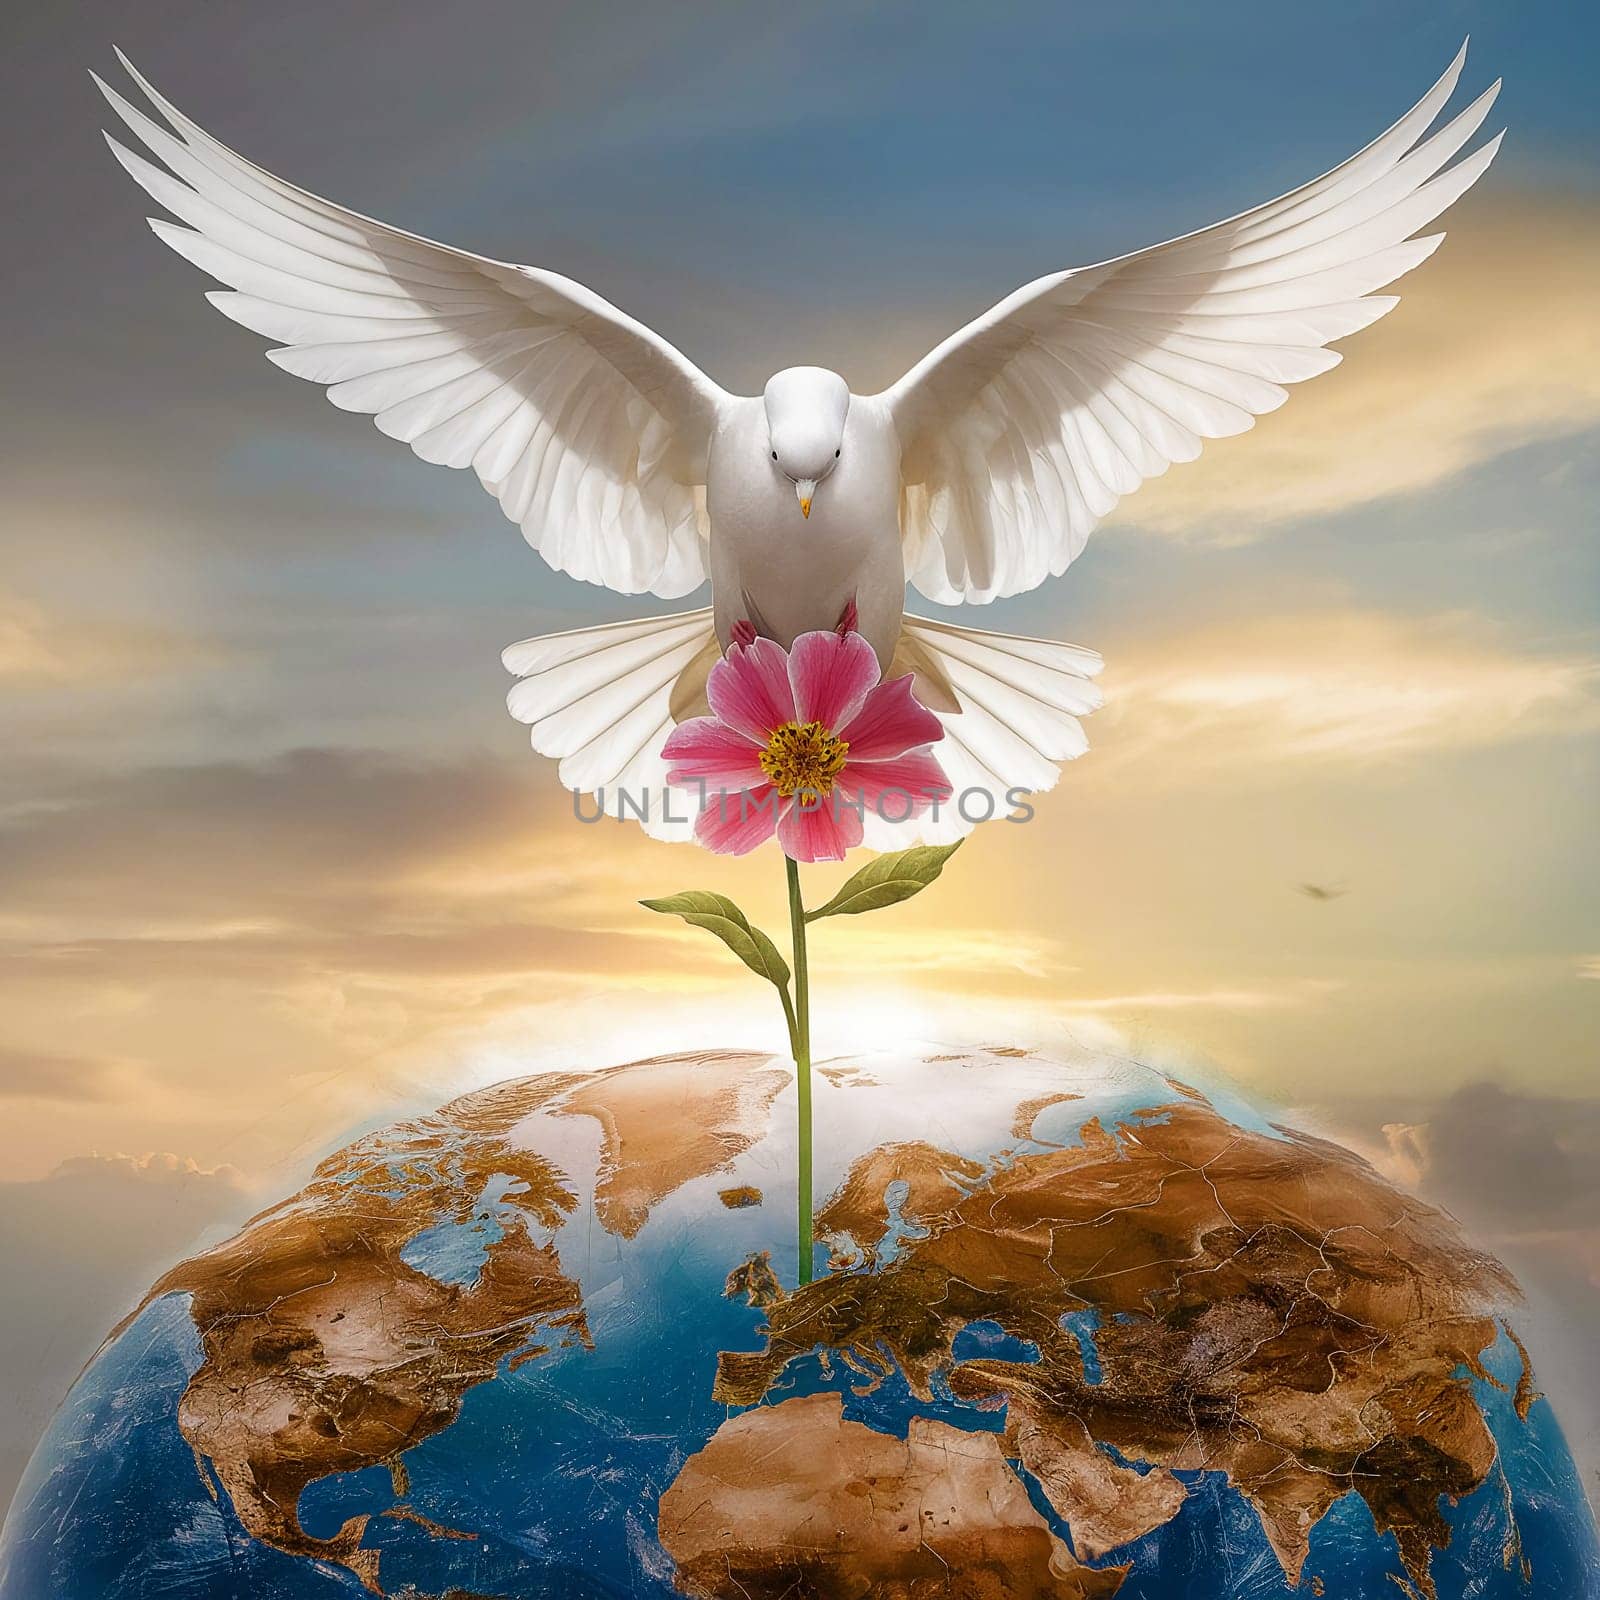 The dove of peace flies over the earth by VeronikaAngo